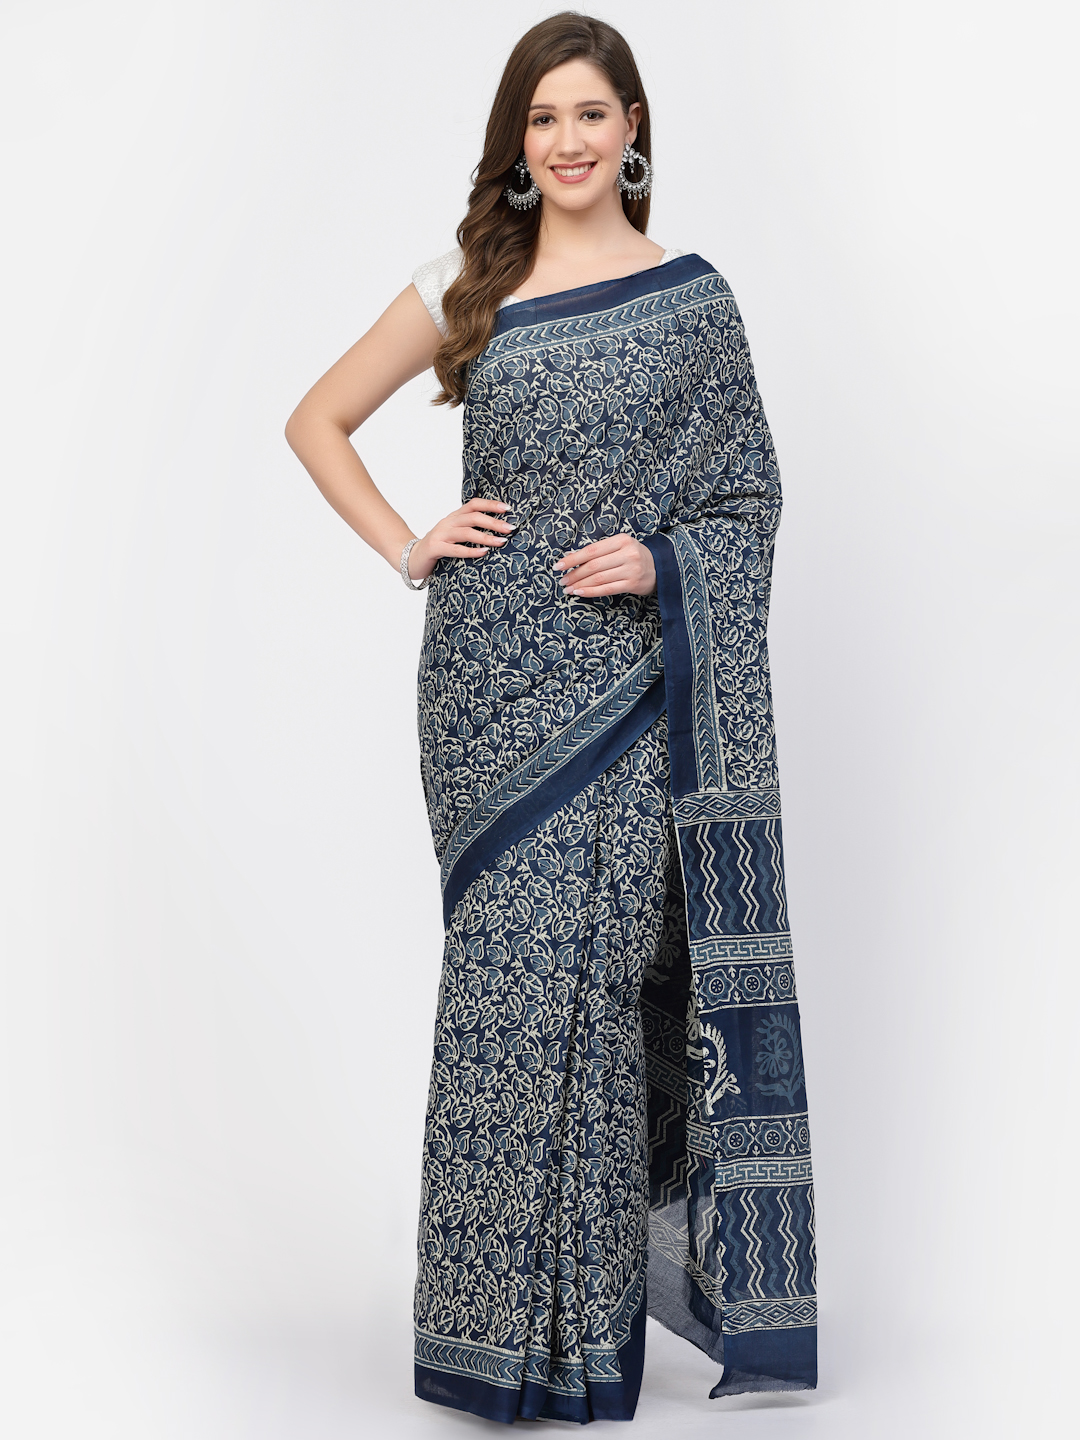 Floral Printed Women's Cotton Floral Printed Saree with Unstitched Blouse